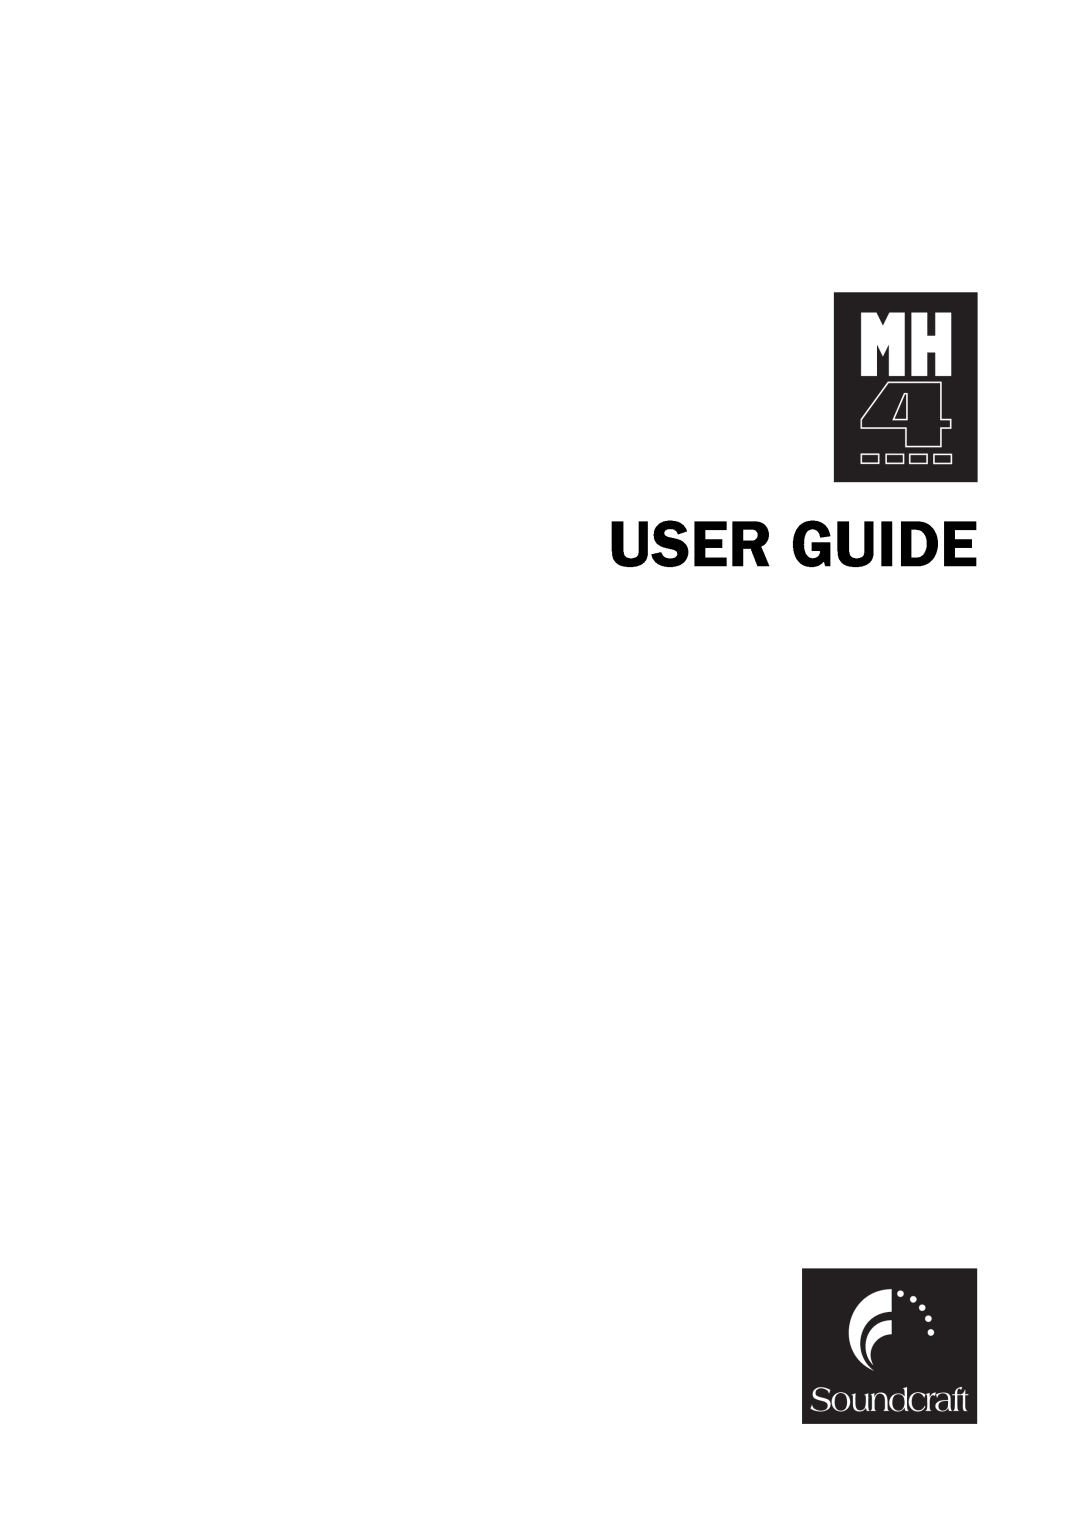 SoundCraft MH4 manual User Guide 